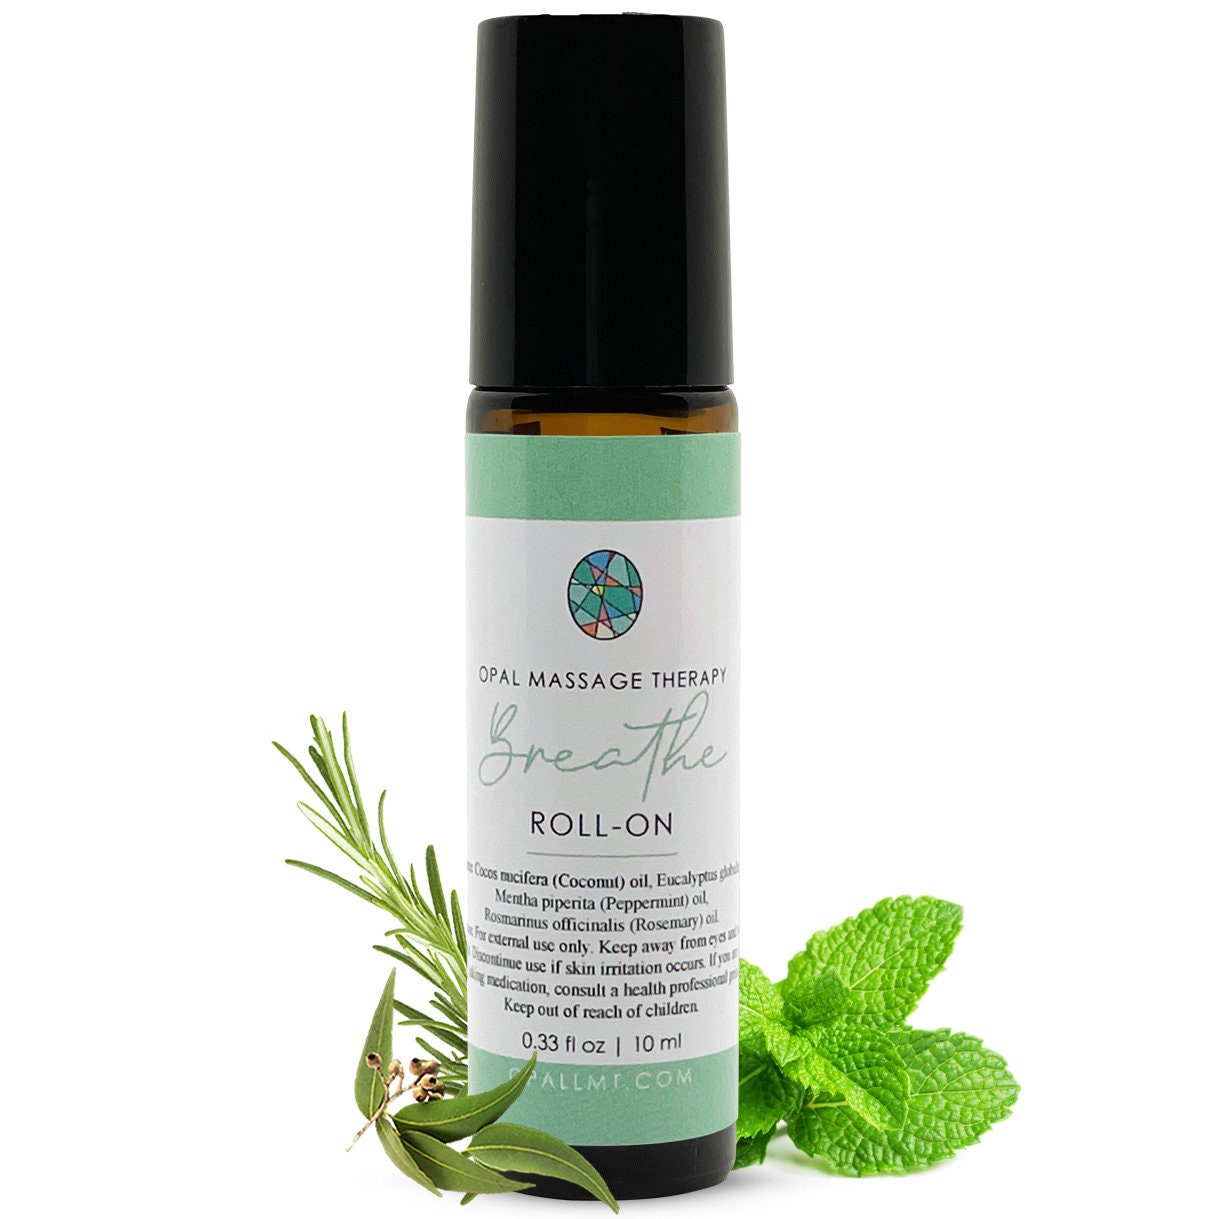 Peppermint Essential Oil Roll-Ons (4-Pack)